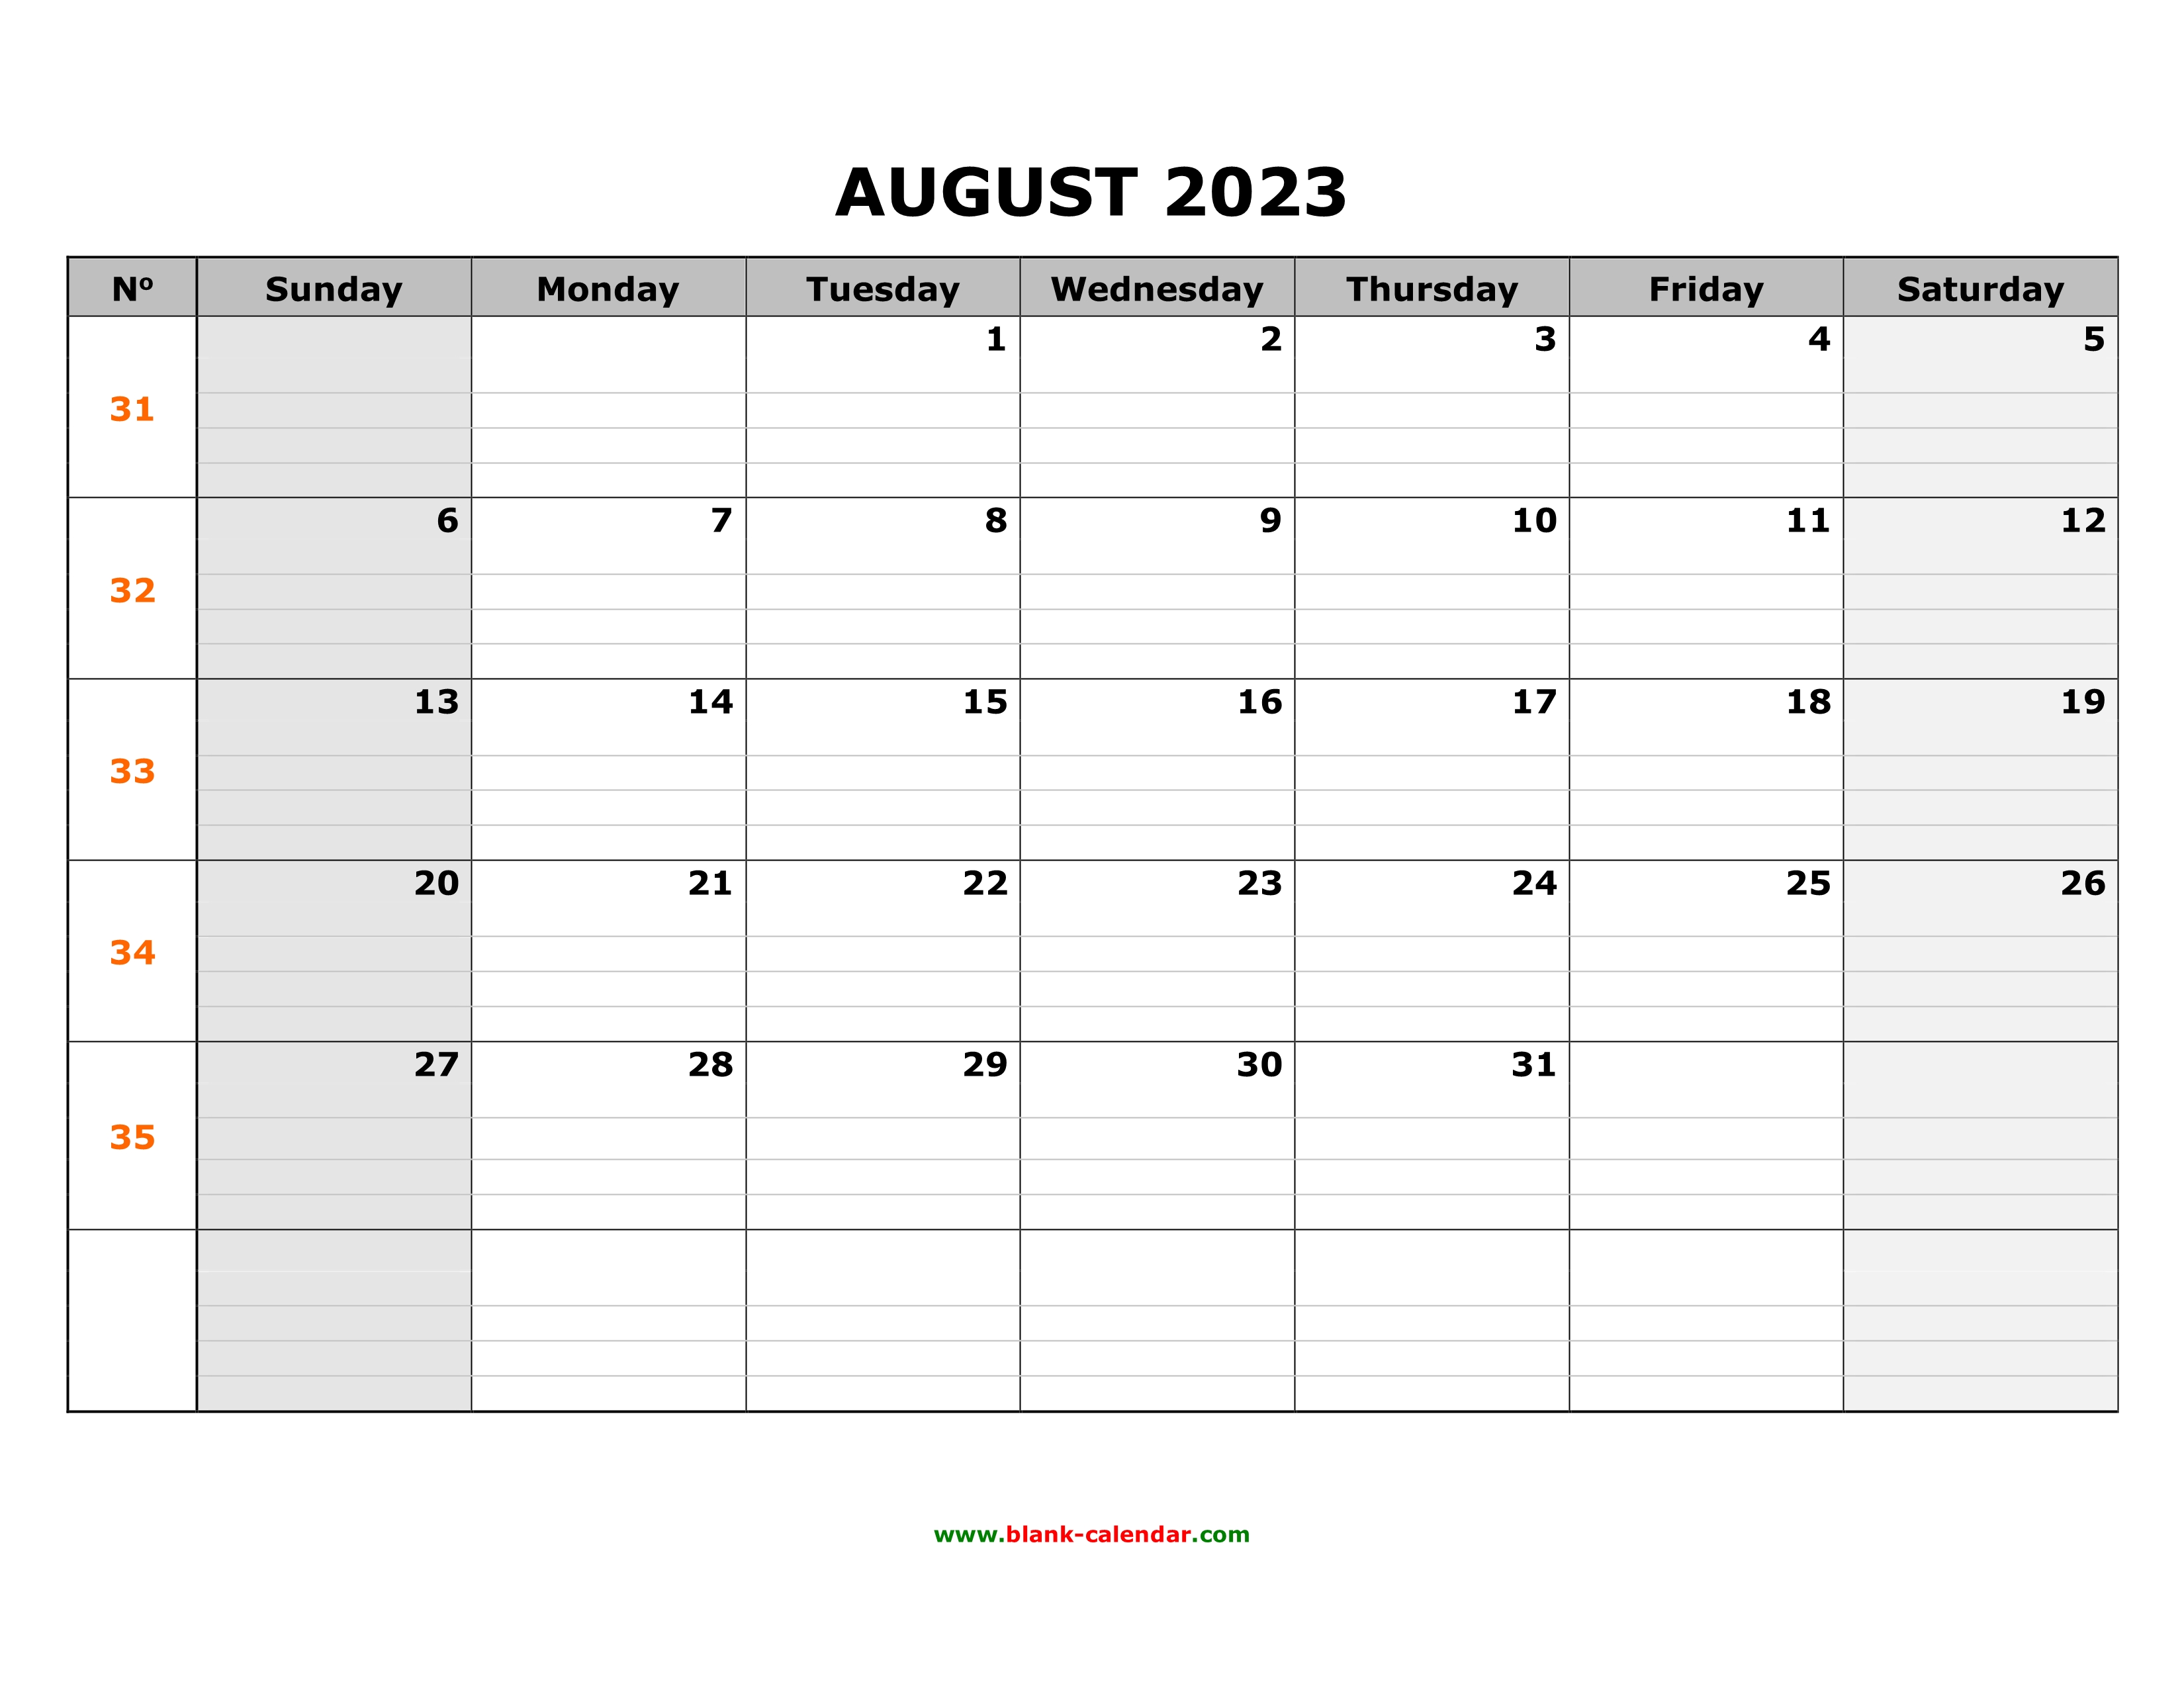 free-download-printable-august-2023-calendar-large-box-grid-space-for